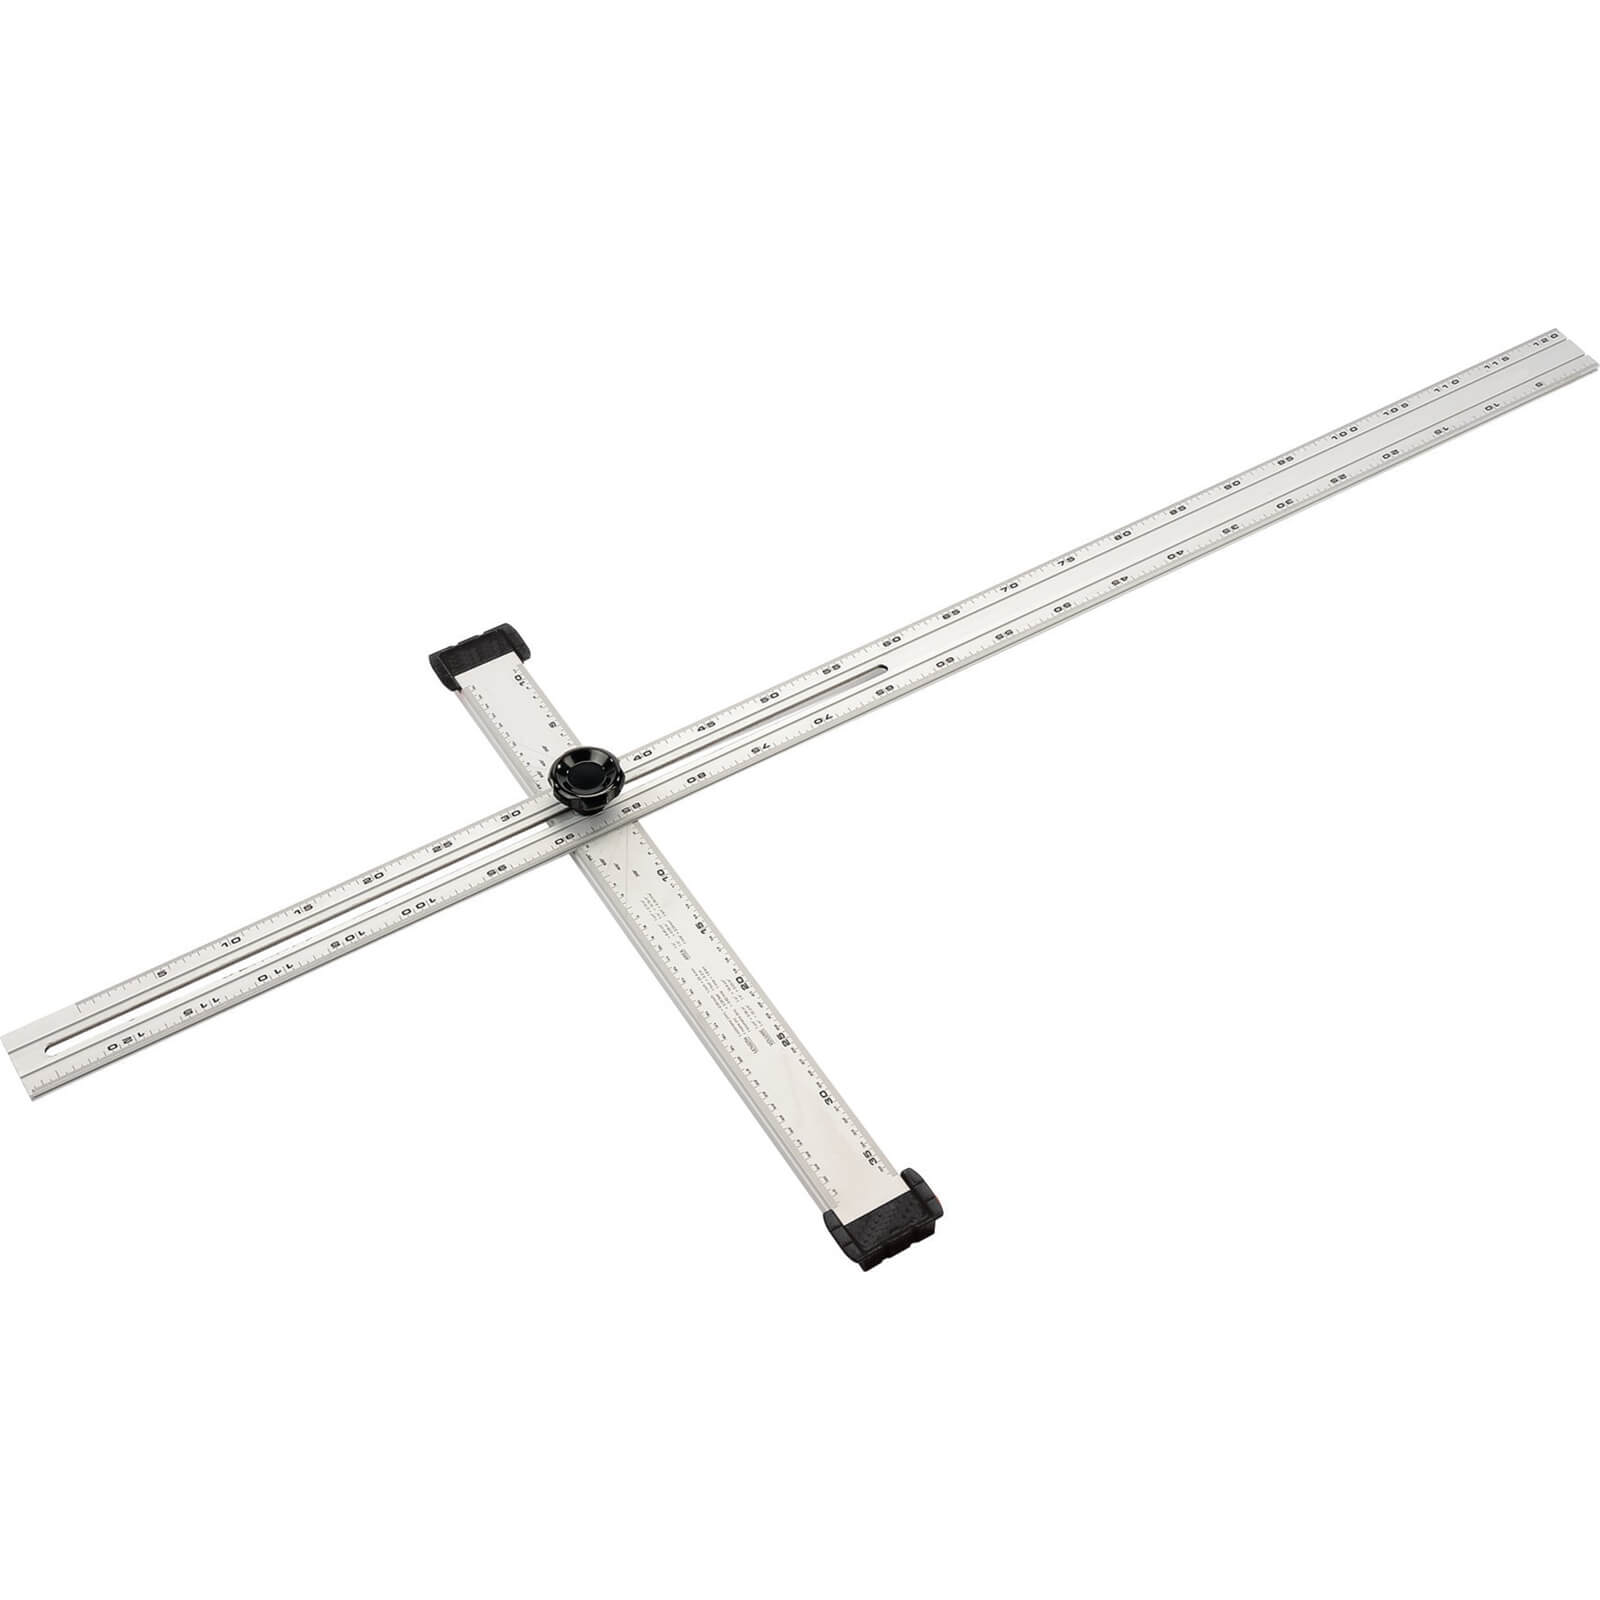 Image of Draper Expert Adjustable Drywall T Square 1200mm